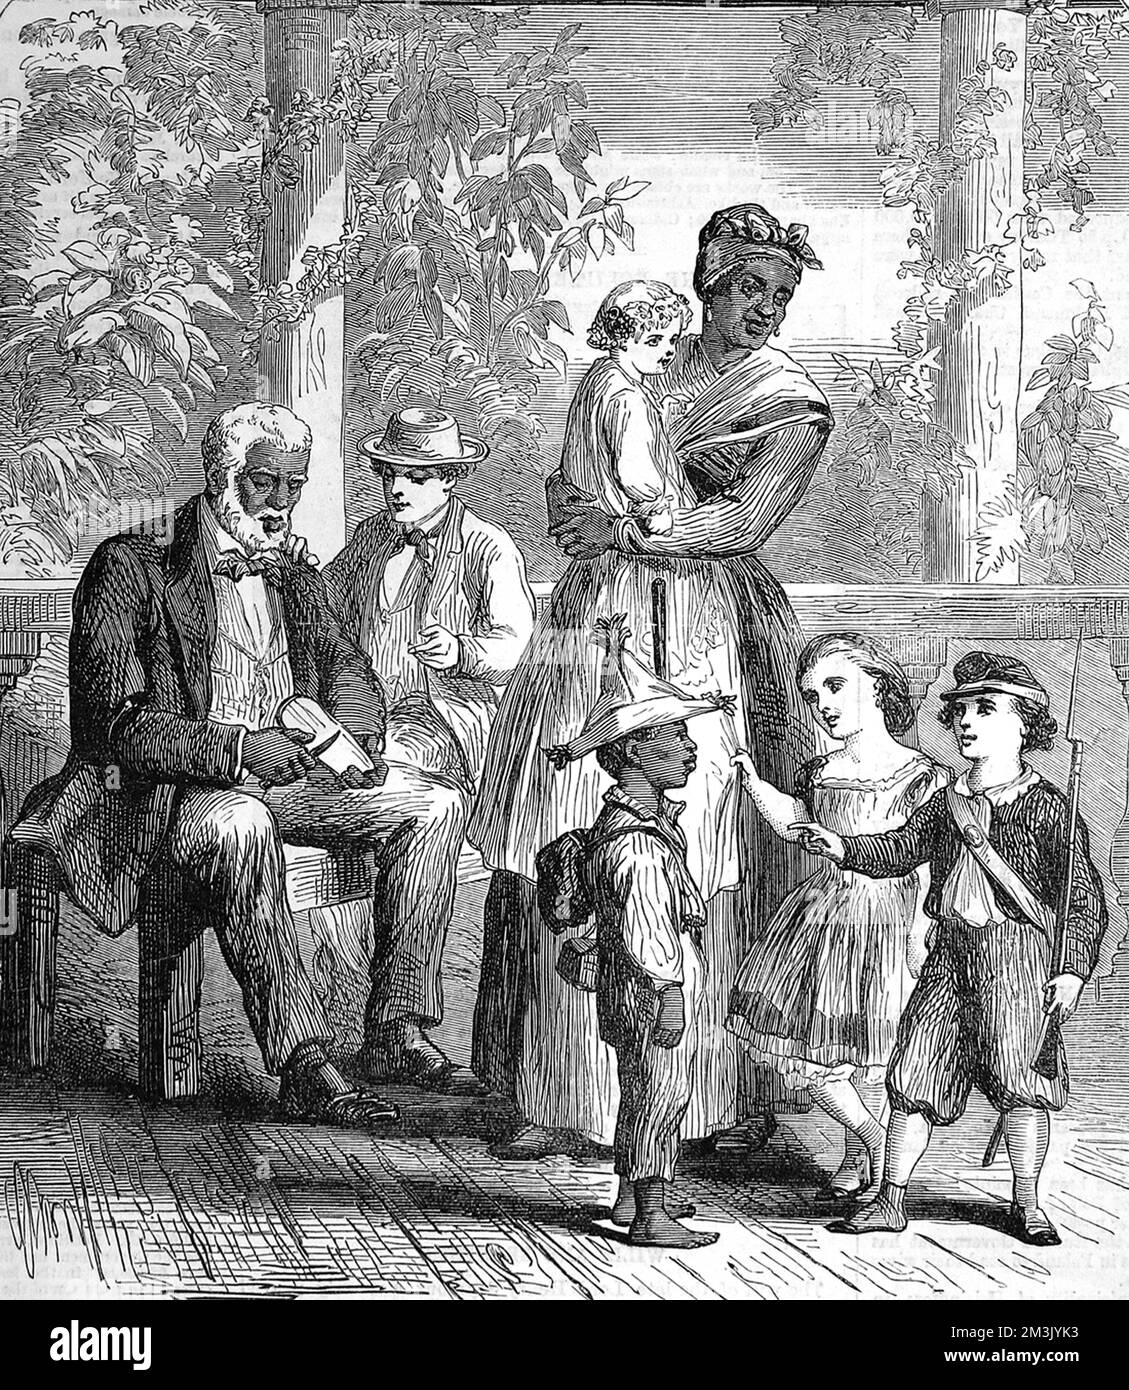 A planter's residence on the Cumbee River, South Carolina representing an idyllic picture of the black slaves' existence. It shows a black nanny looking after several white children, with her own black son playing alongside.  The white son is in Confederate uniform.  A well-dressed elderly black man is carving a small piece of wood.     Date: 1863 Stock Photo